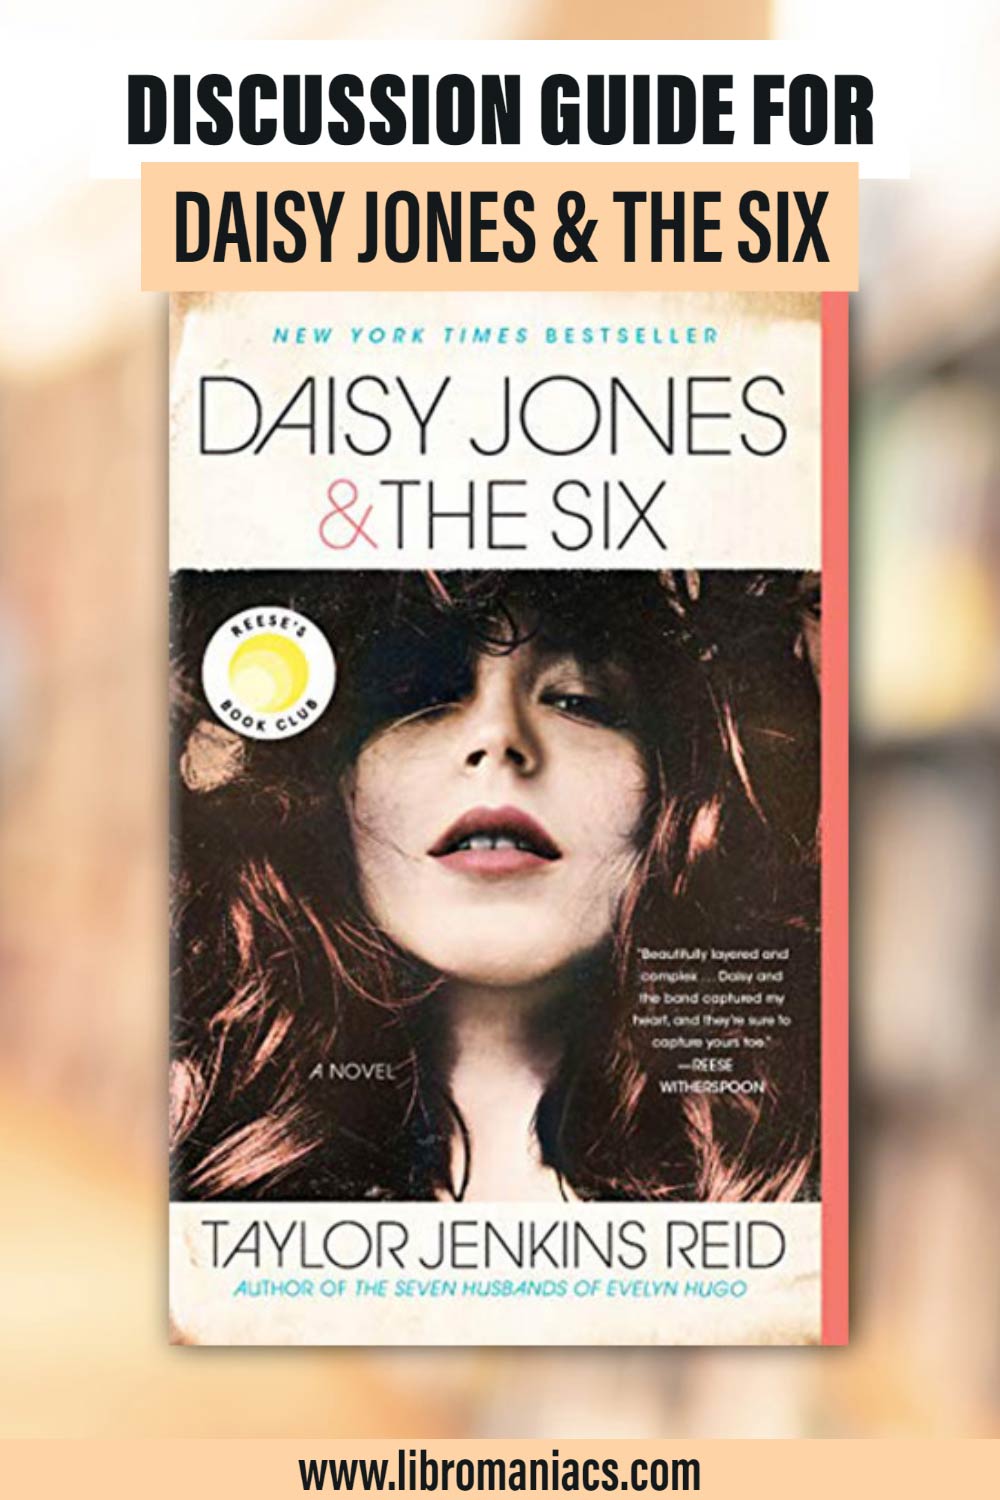 Daisy Jones & the Six discussion guide